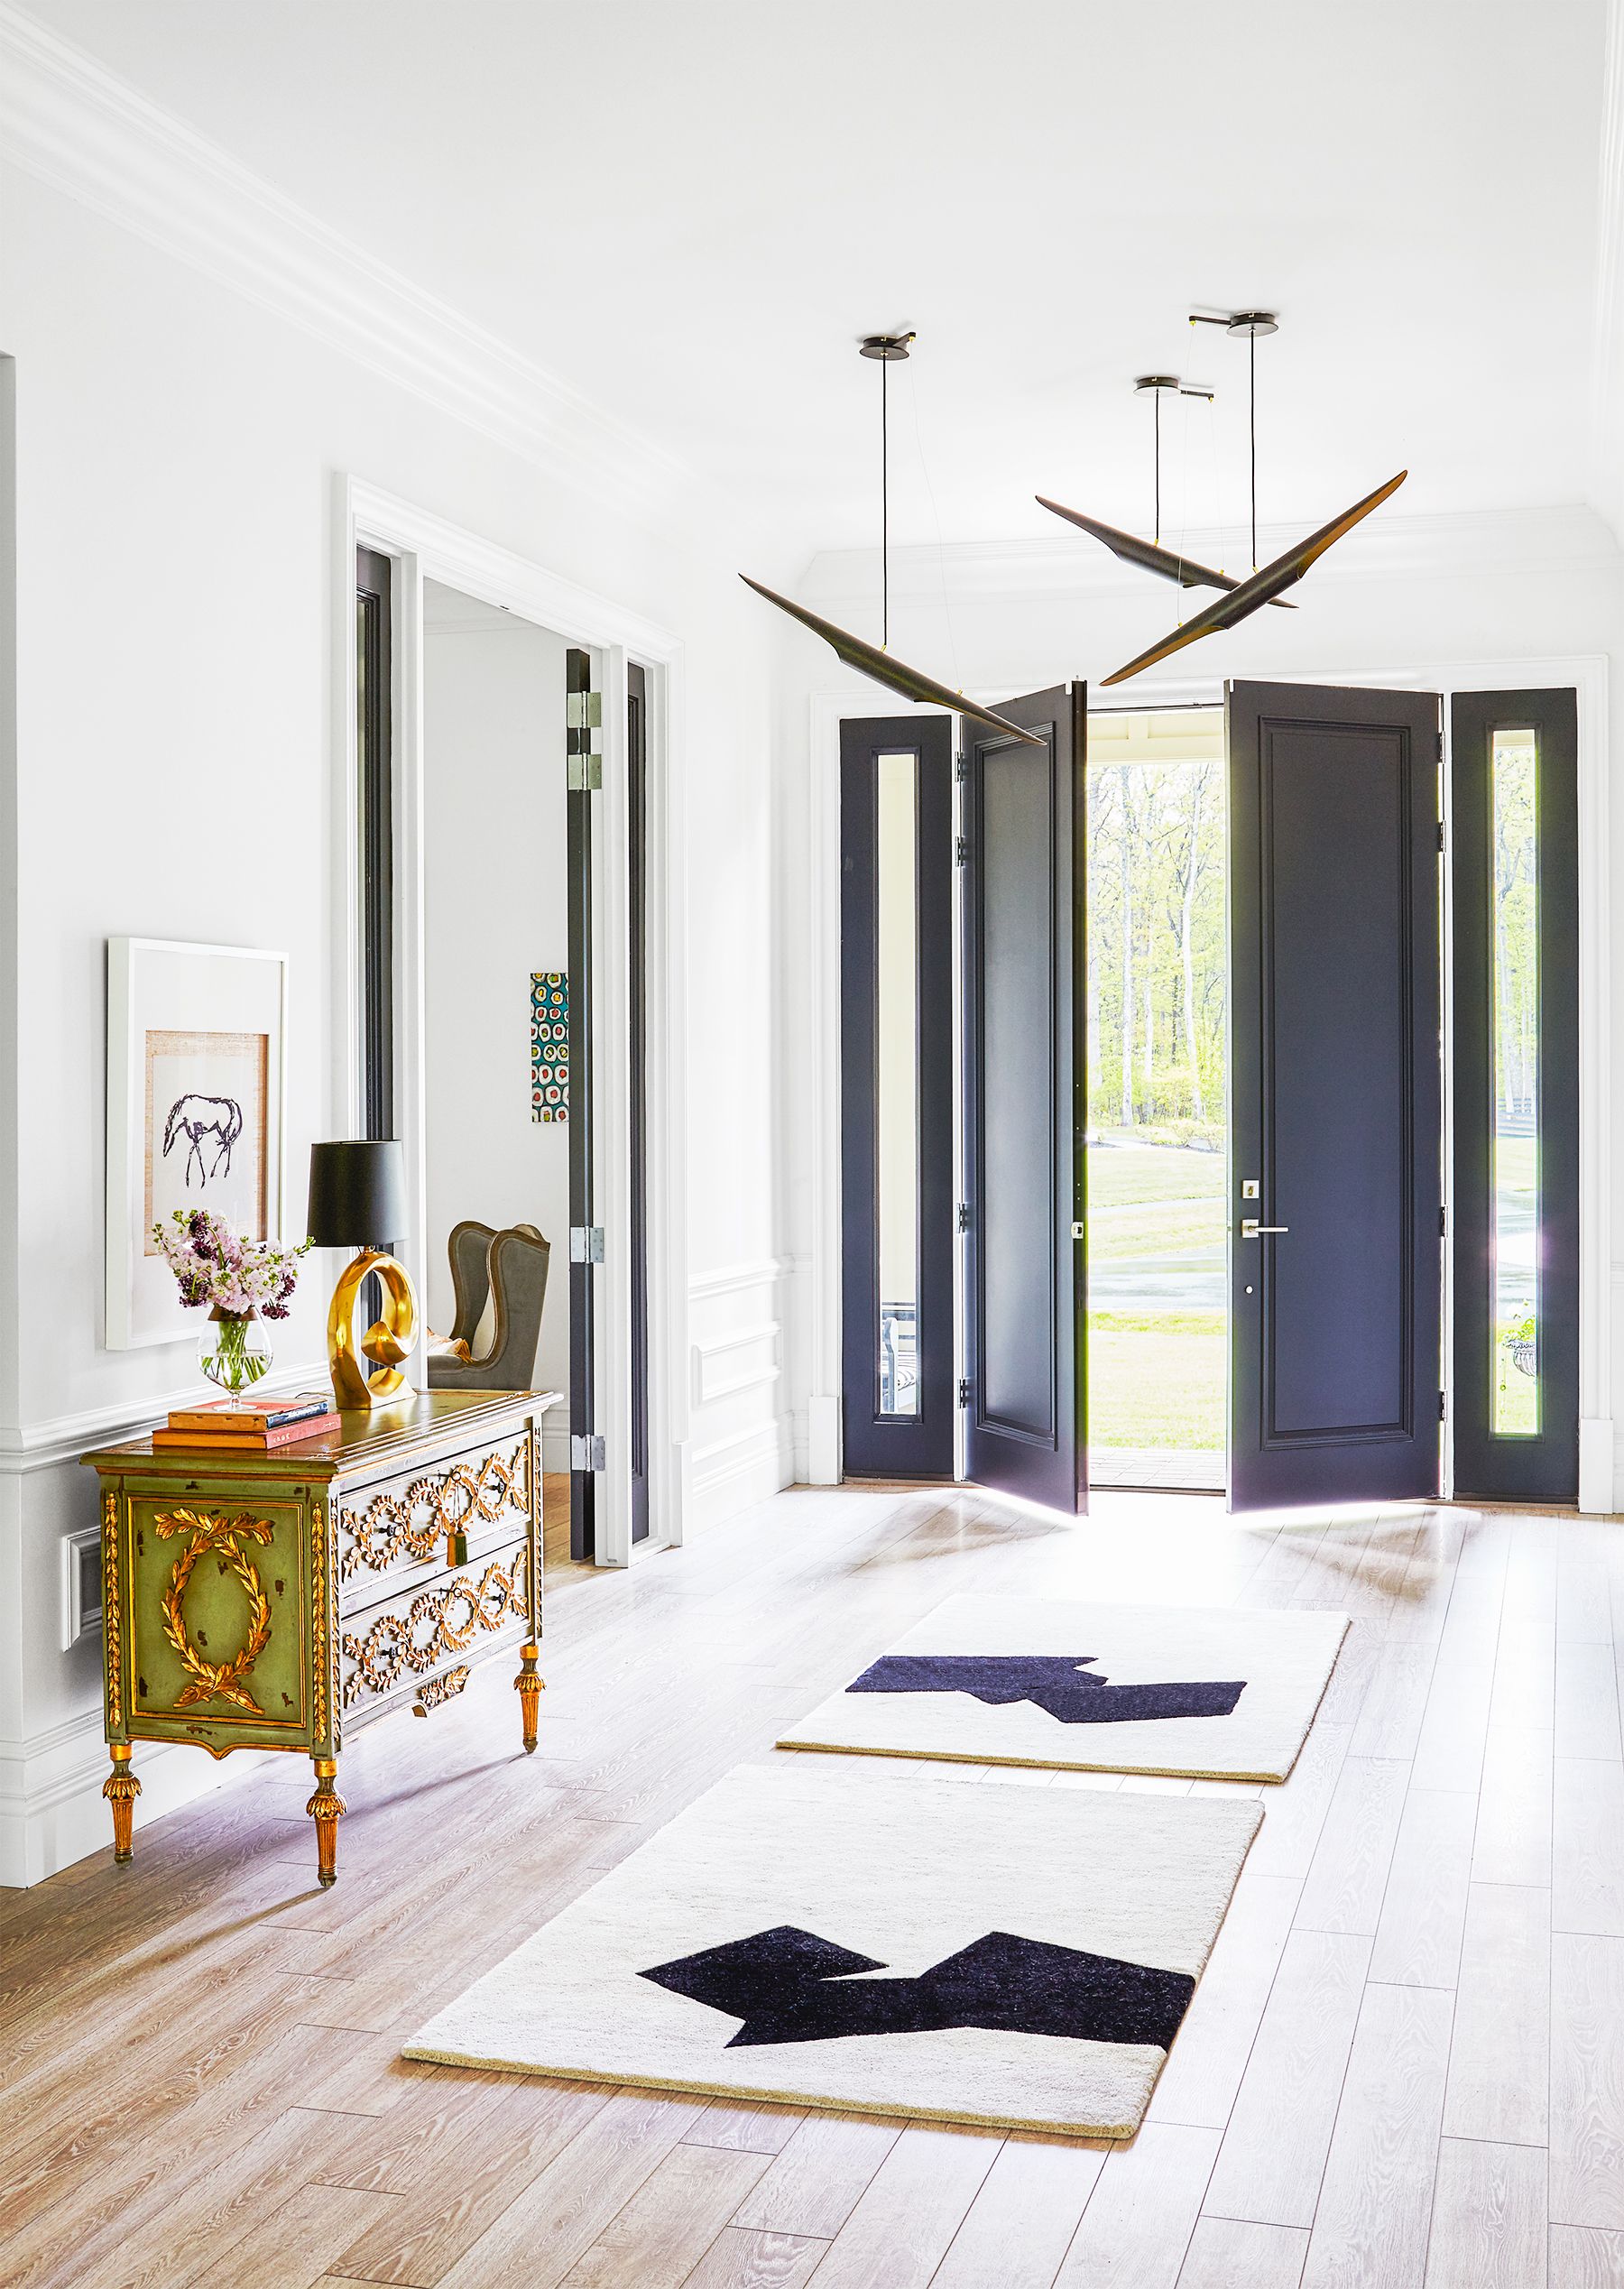 6 new decorating ideas to make the first
impression of your entrance a remarkable one